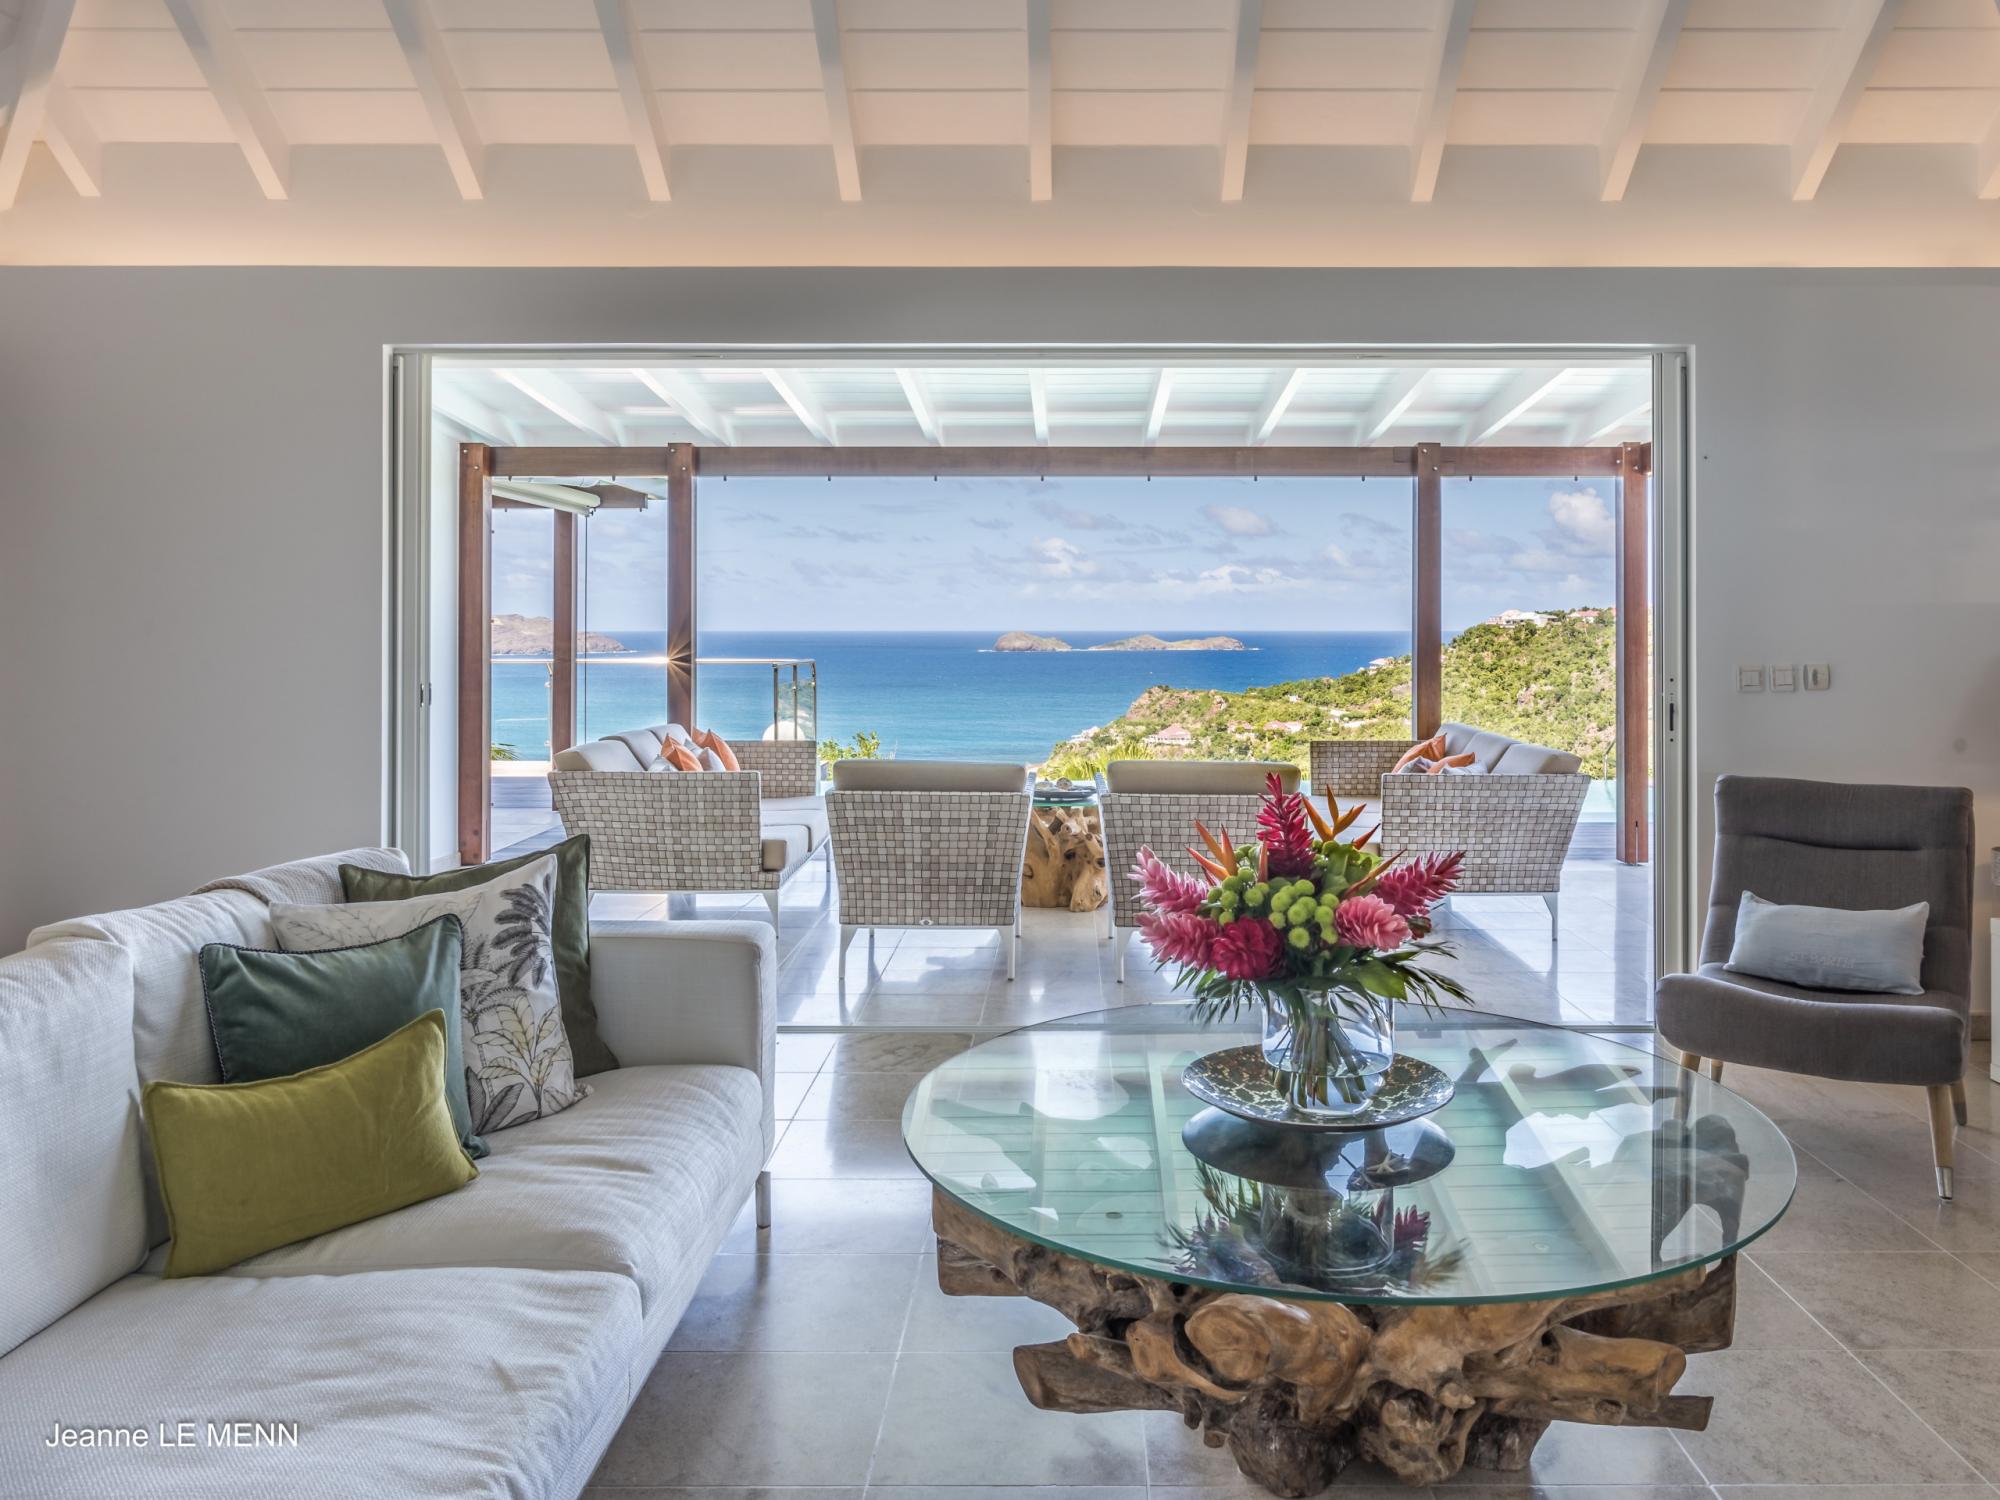 Isia is a very popular villa in St Barths on the heights of St Jean - Saint Barthélemy